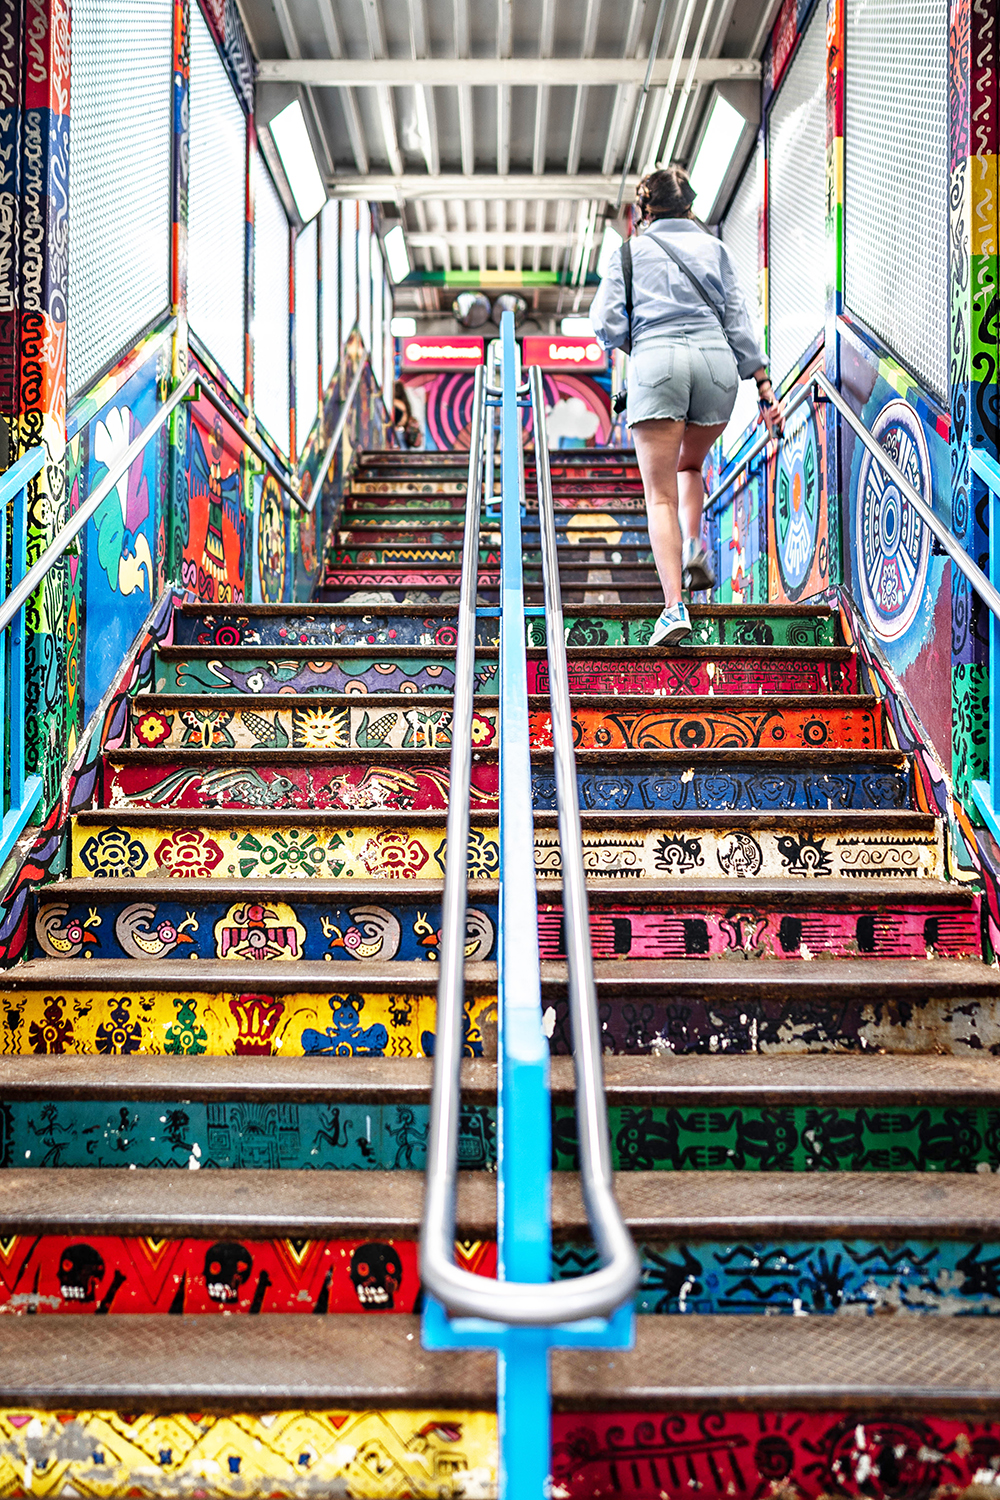 Colofully painted stairs in the subway of Pilsen, Chicago